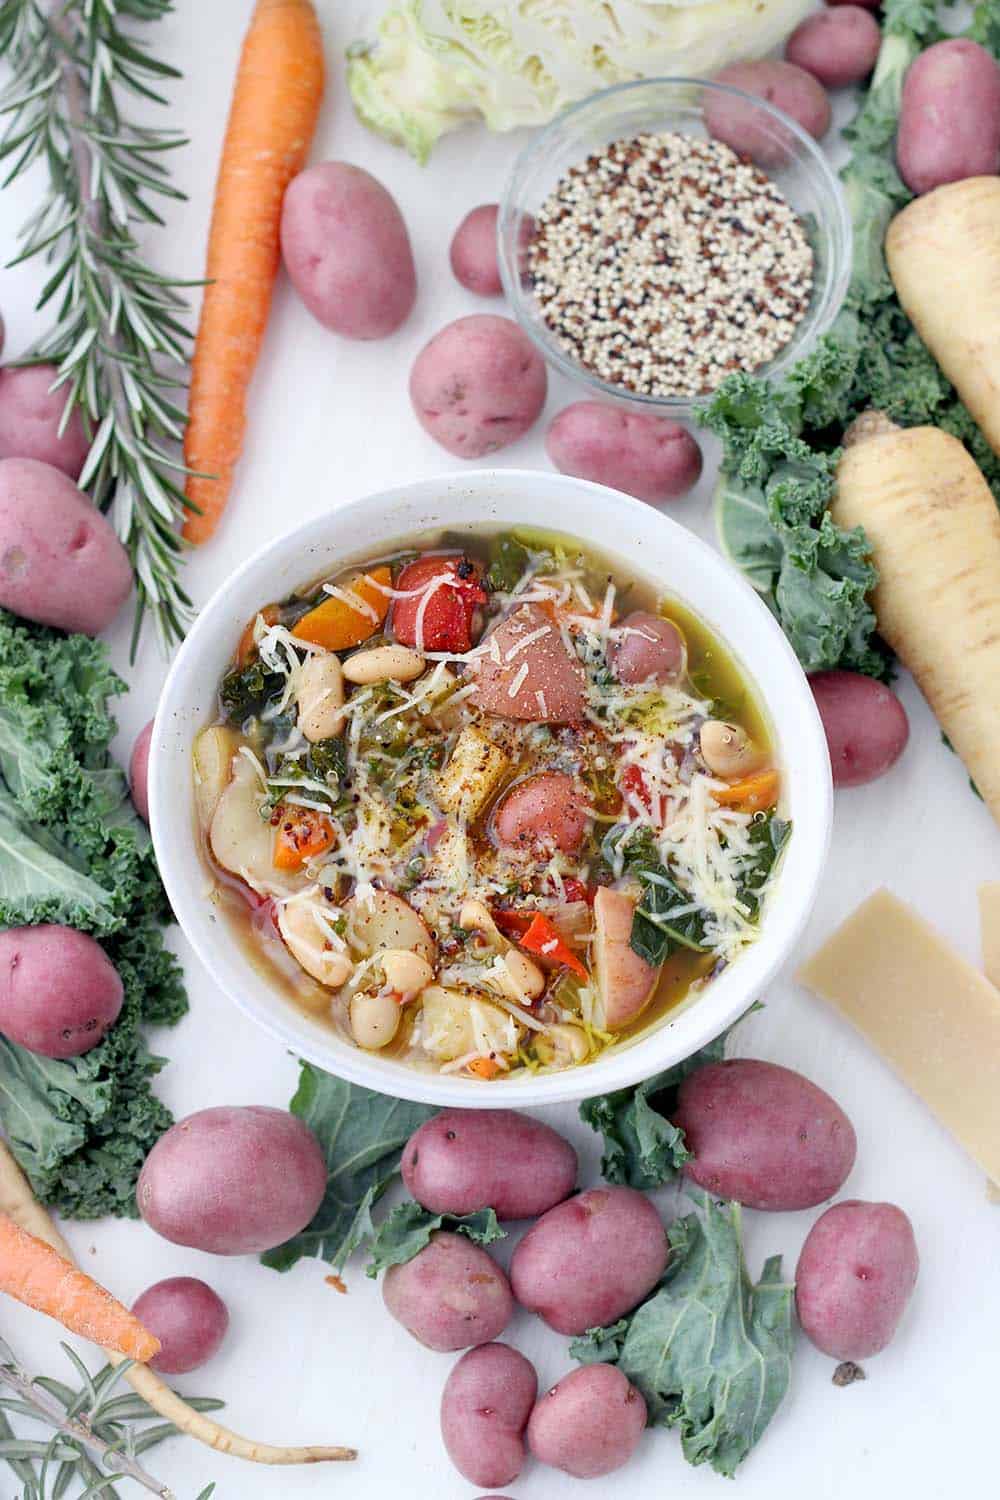 This Winter Minestrone Soup is packed with seasonal root vegetables like potatoes, parsnips, cabbage, and kale, as well as healthy quinoa and beans. Topped with plenty of extra-virgin olive oil and parmesan cheese, it's a delicious, hearty recipe to keep you warm this winter! Stovetop, Slow Cooker, and Instant Pot friendly.